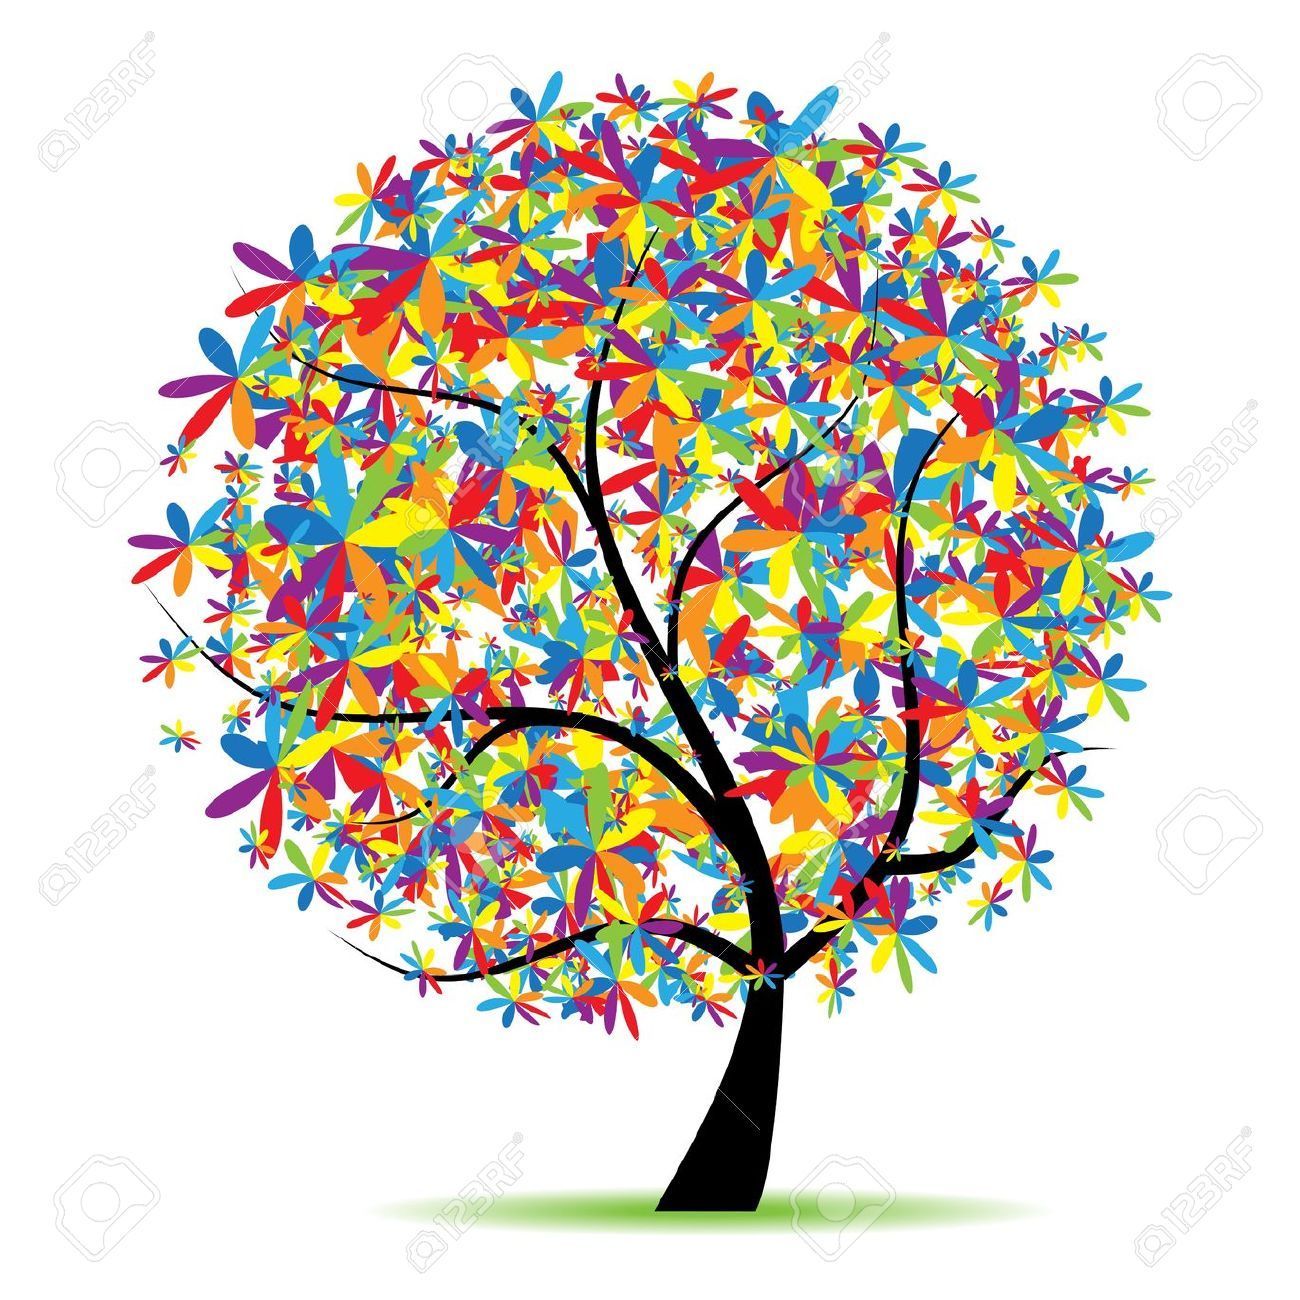 tree of life clipart colorful